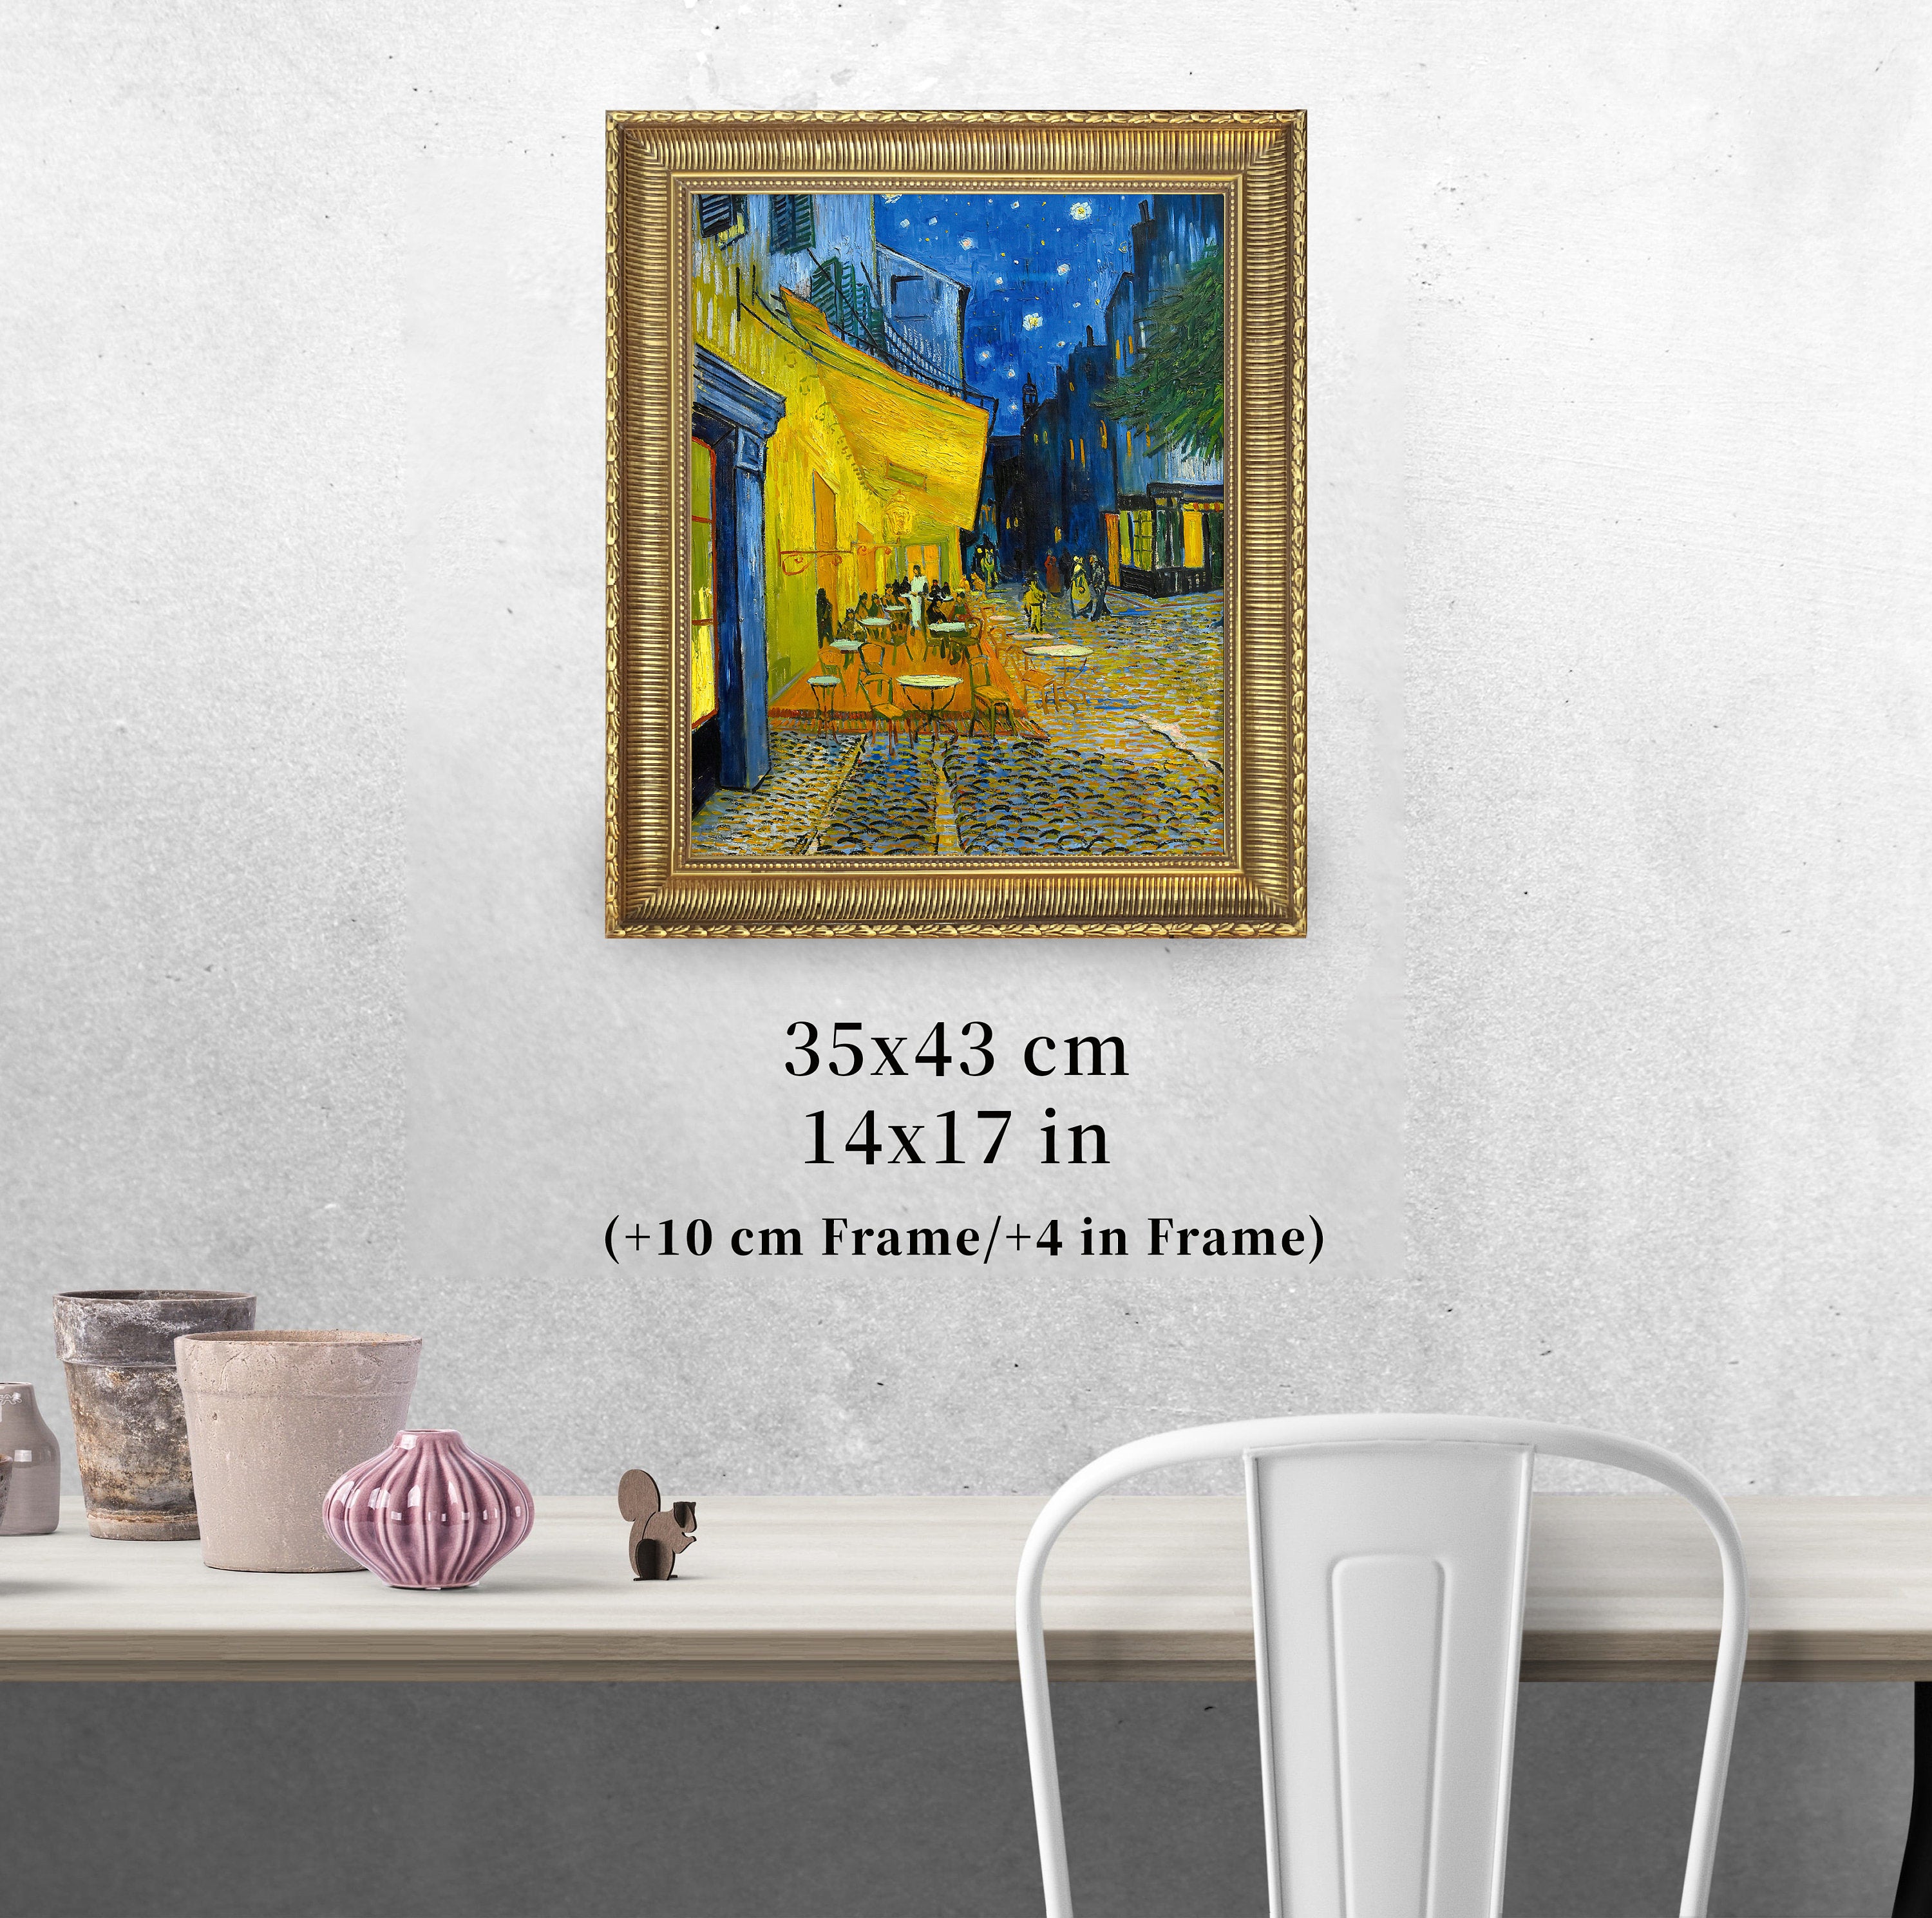 Terrace of a Café at Night by Vincent Van Gogh, 3d Printed with 